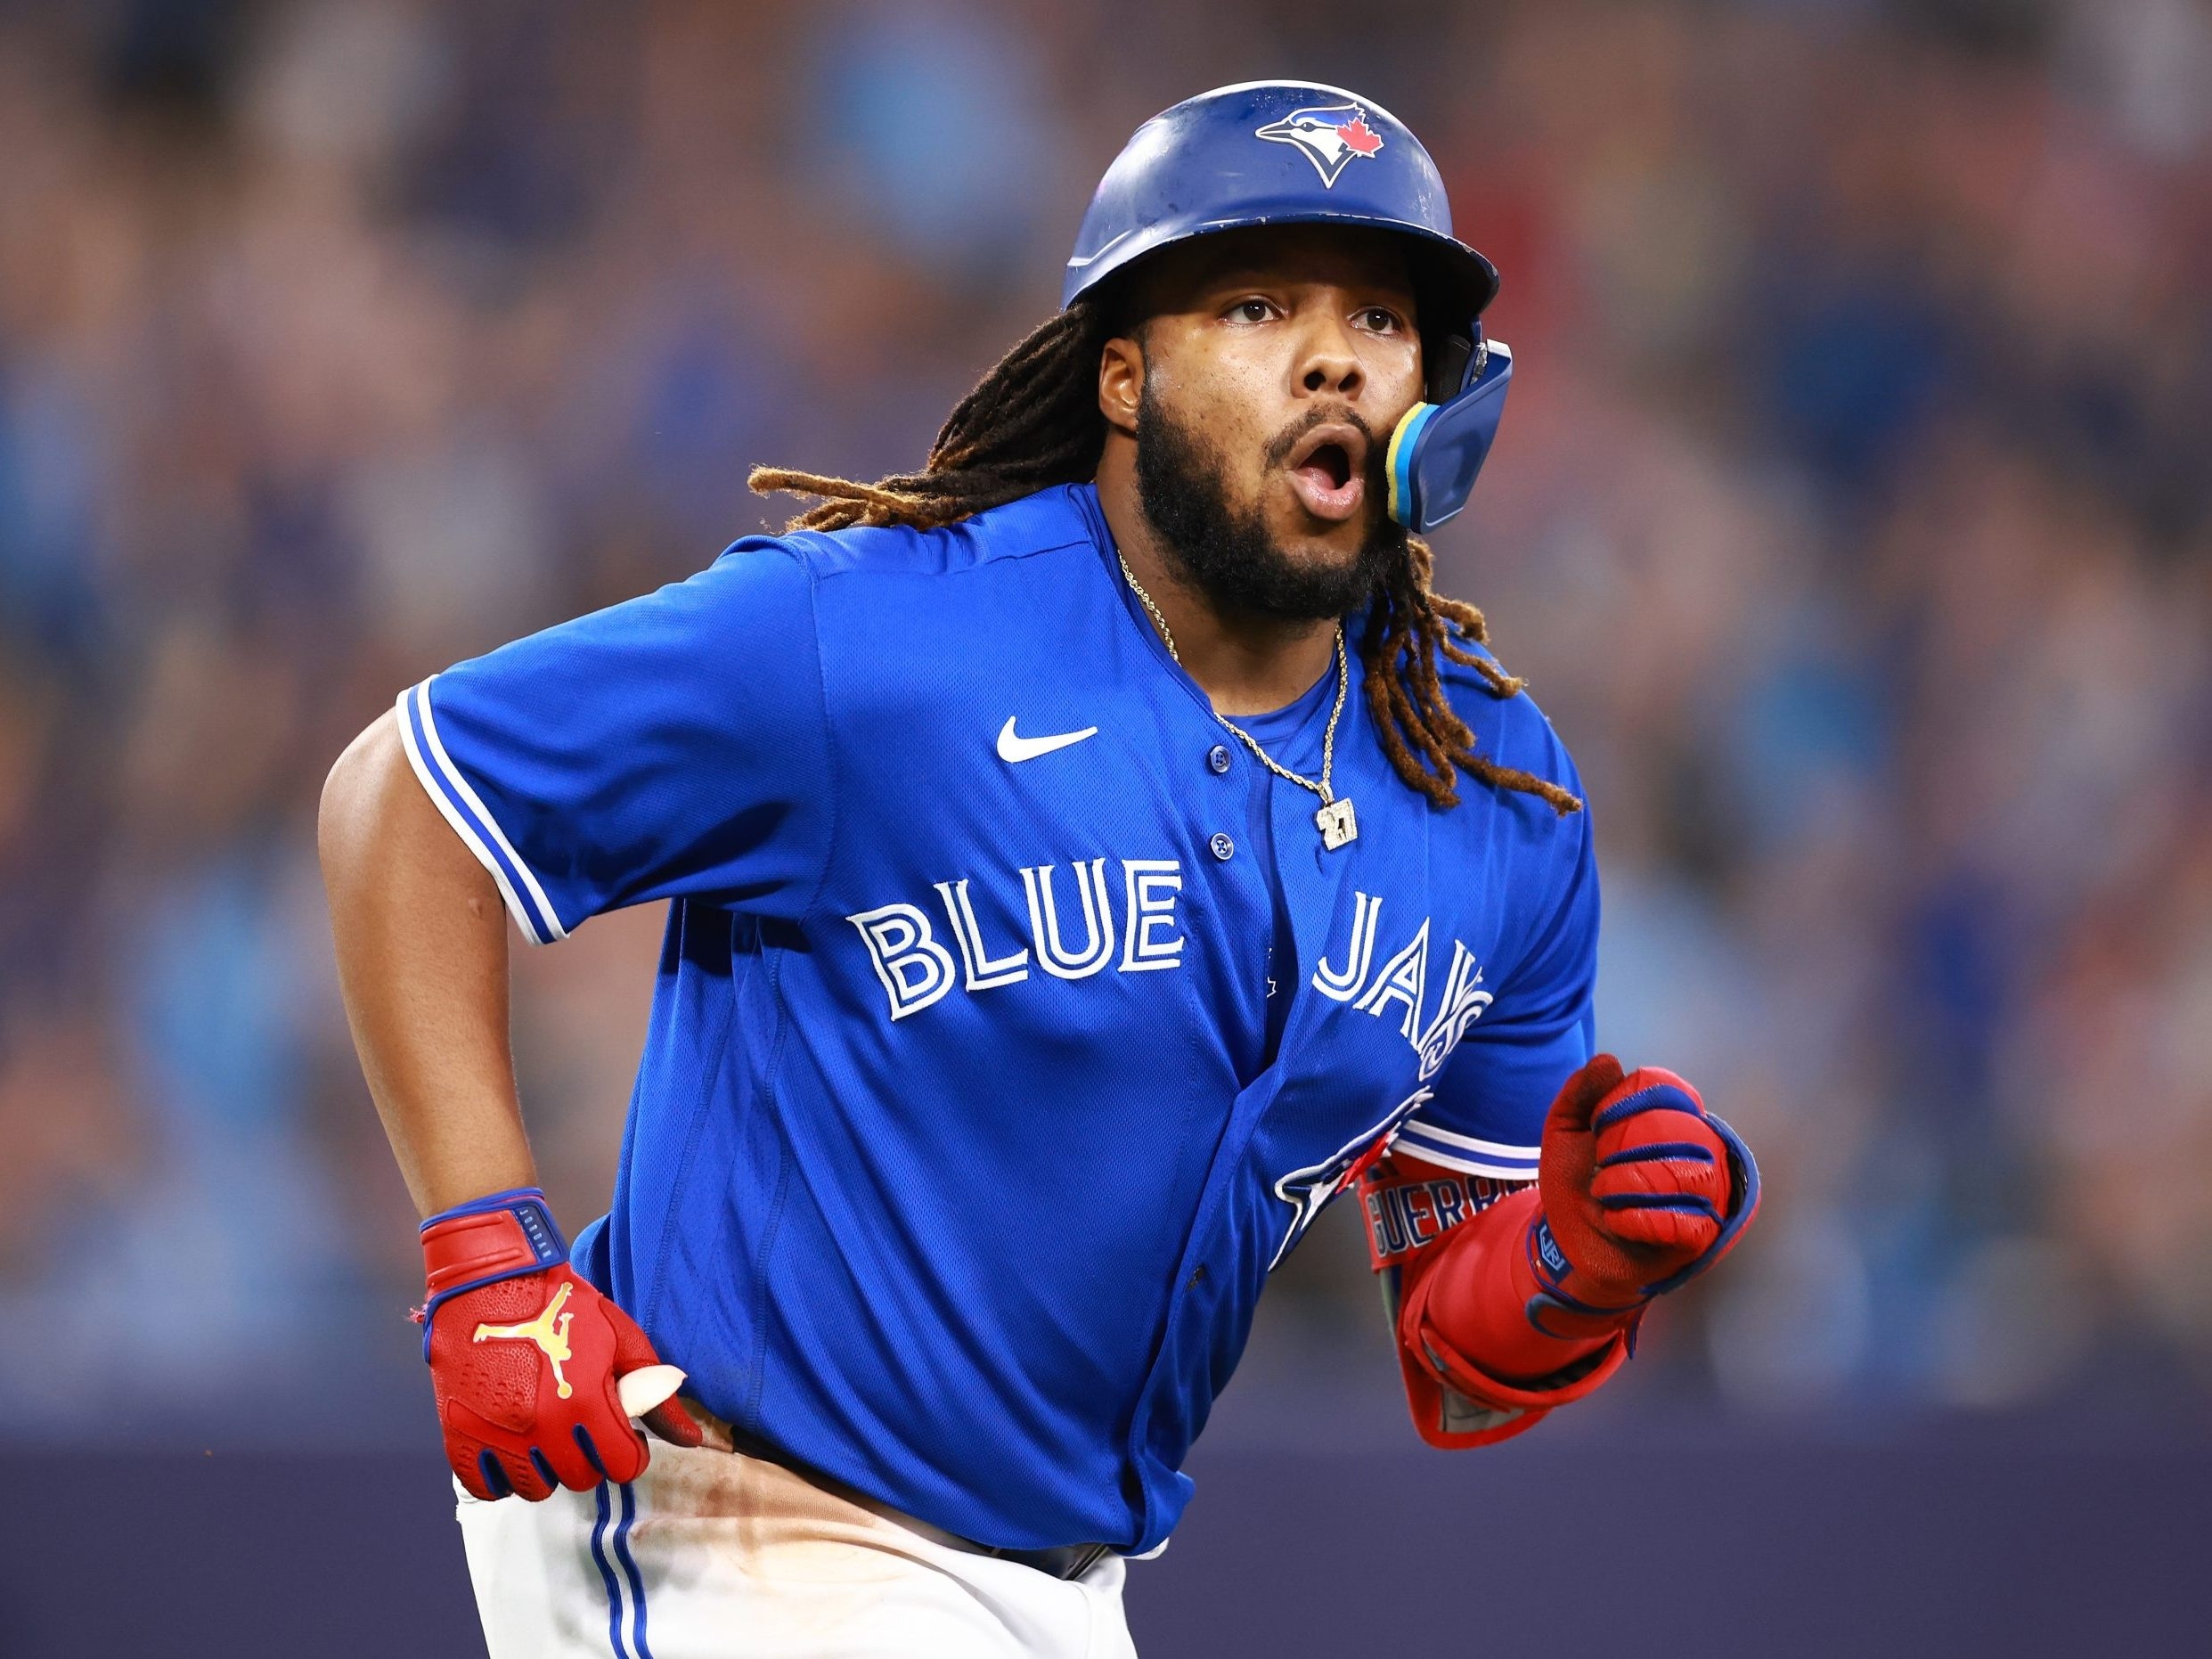 BLOWOUT BLAST: Another big Vlad Guerrero Jr. homer helps Blue Jays turn tables on lowly A’s